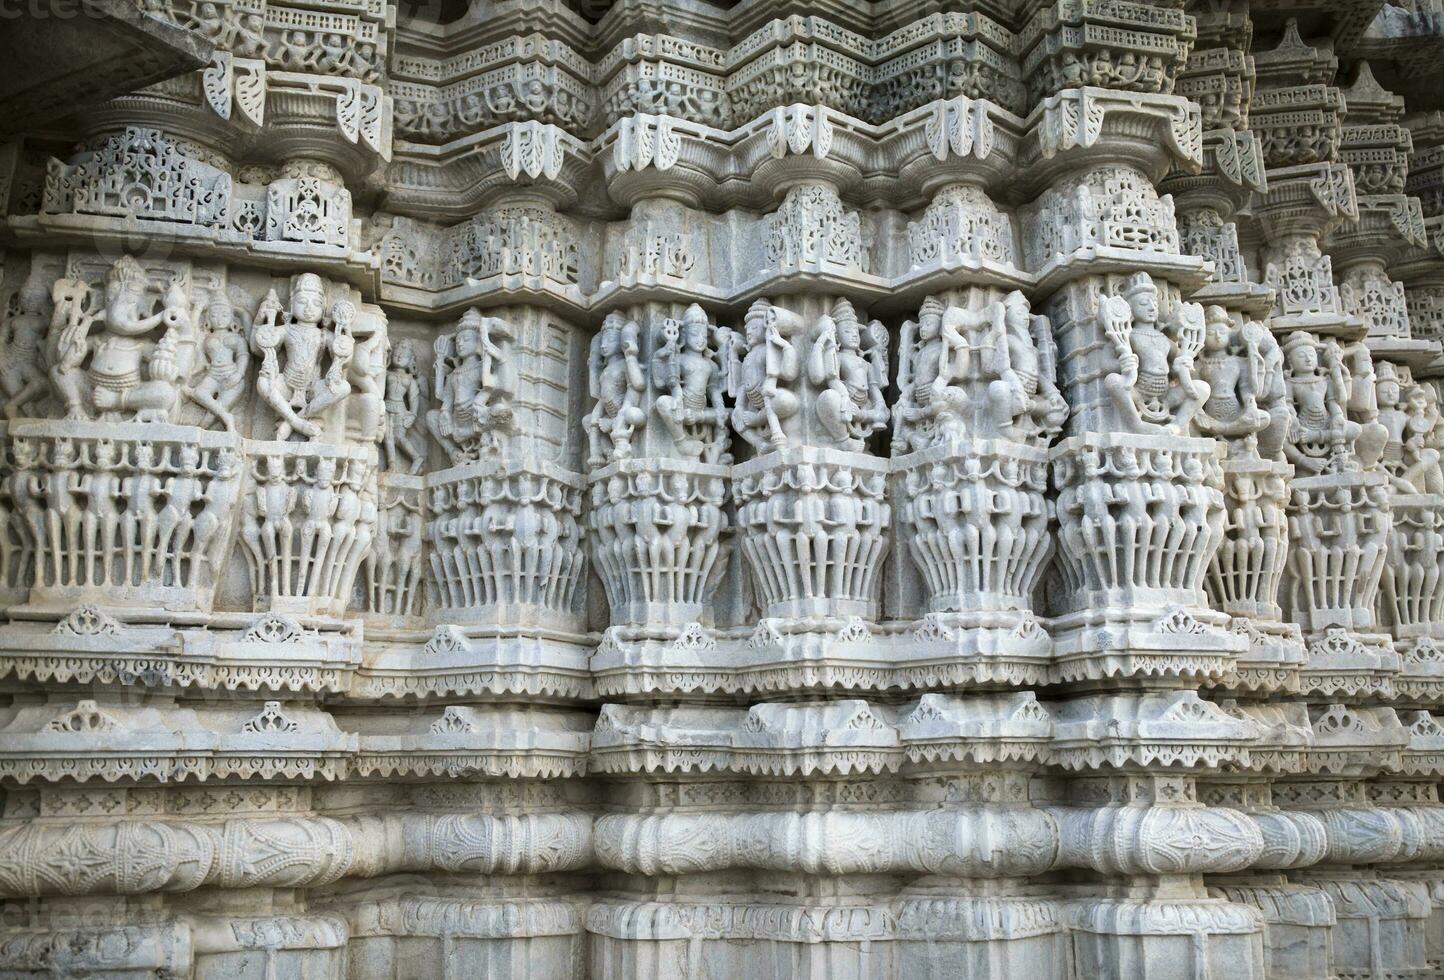 Indian Ancient Architectural Ornament photo